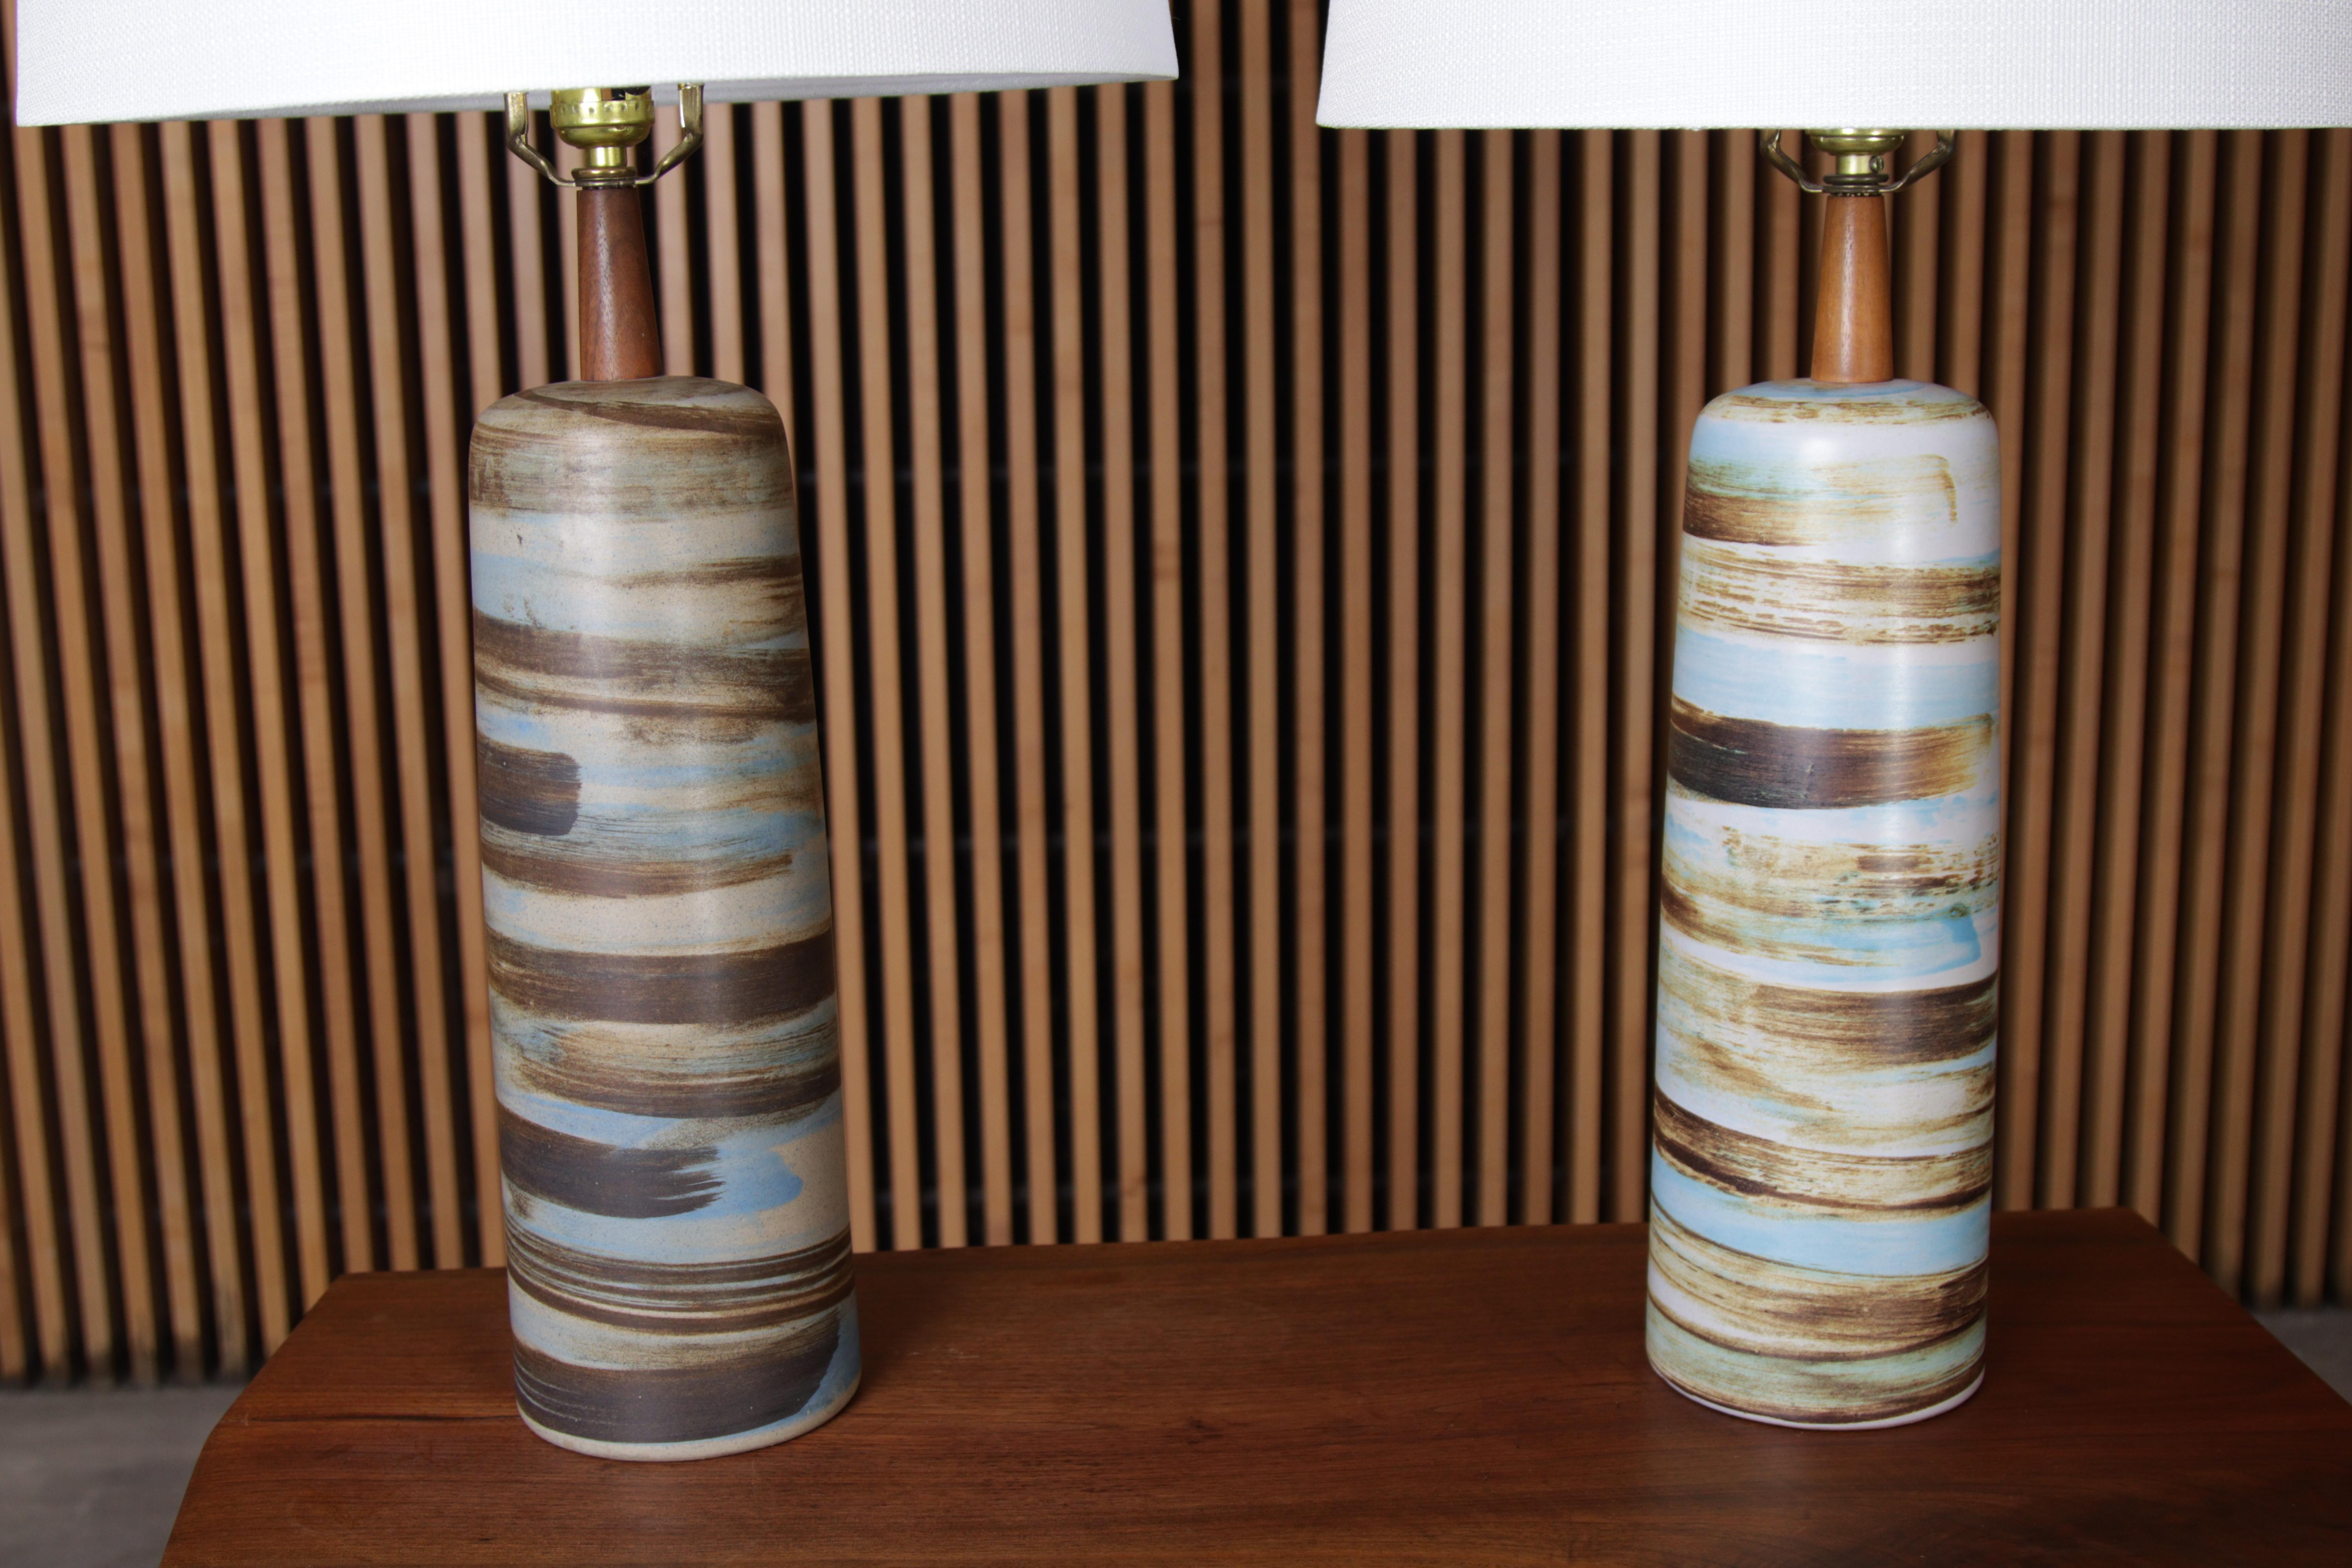 A pair of ceramic and walnut lamps designed by Jane and Gordon Martz for Marshall Studios. Ceramic glaze featuring light blue, white, tan and brown swirls. Every lamp is handmade, glazed and unique. One lamp shows a darker glaze and one shows a